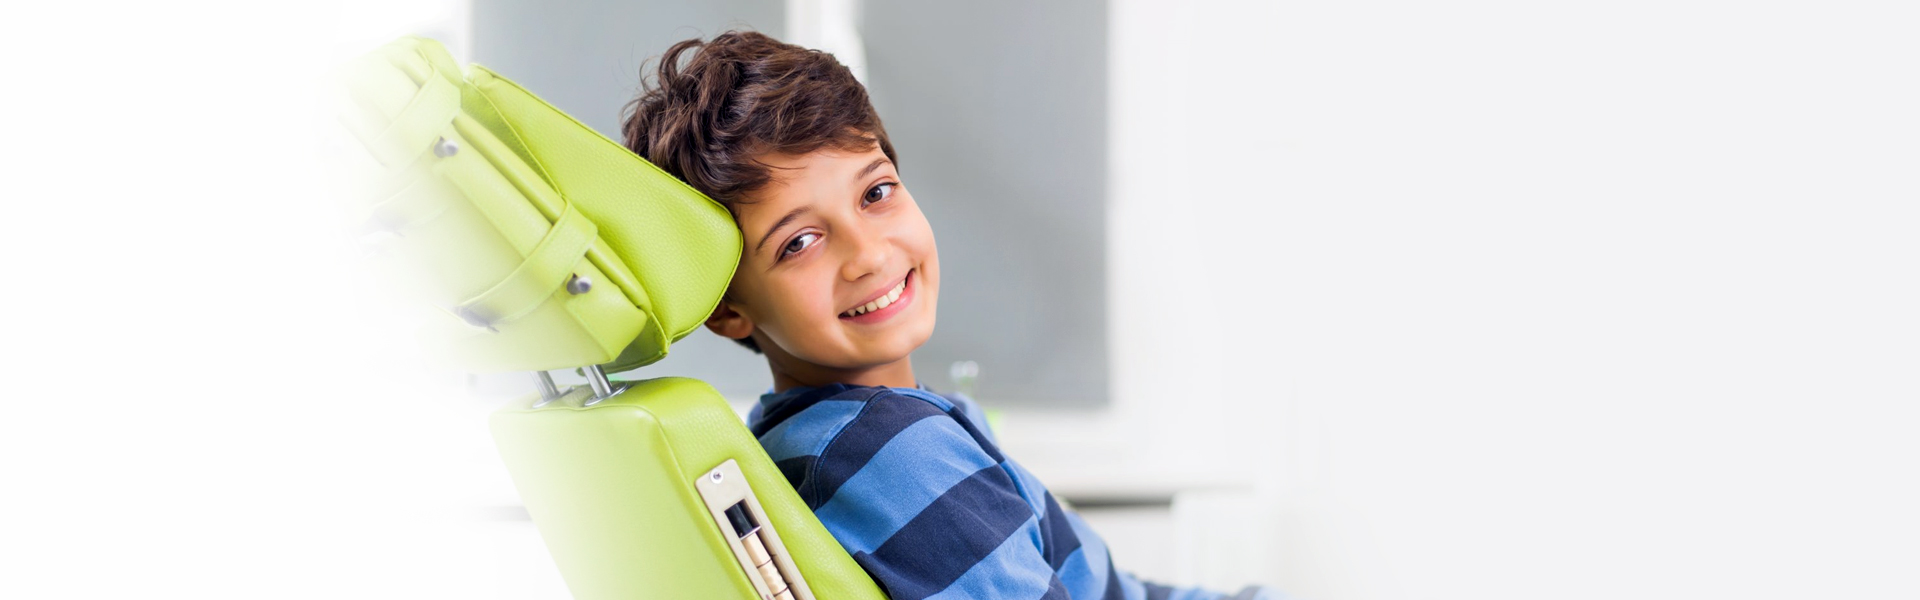 Reasons Why a Pediatric Dentist Is Beneficial for Your Child